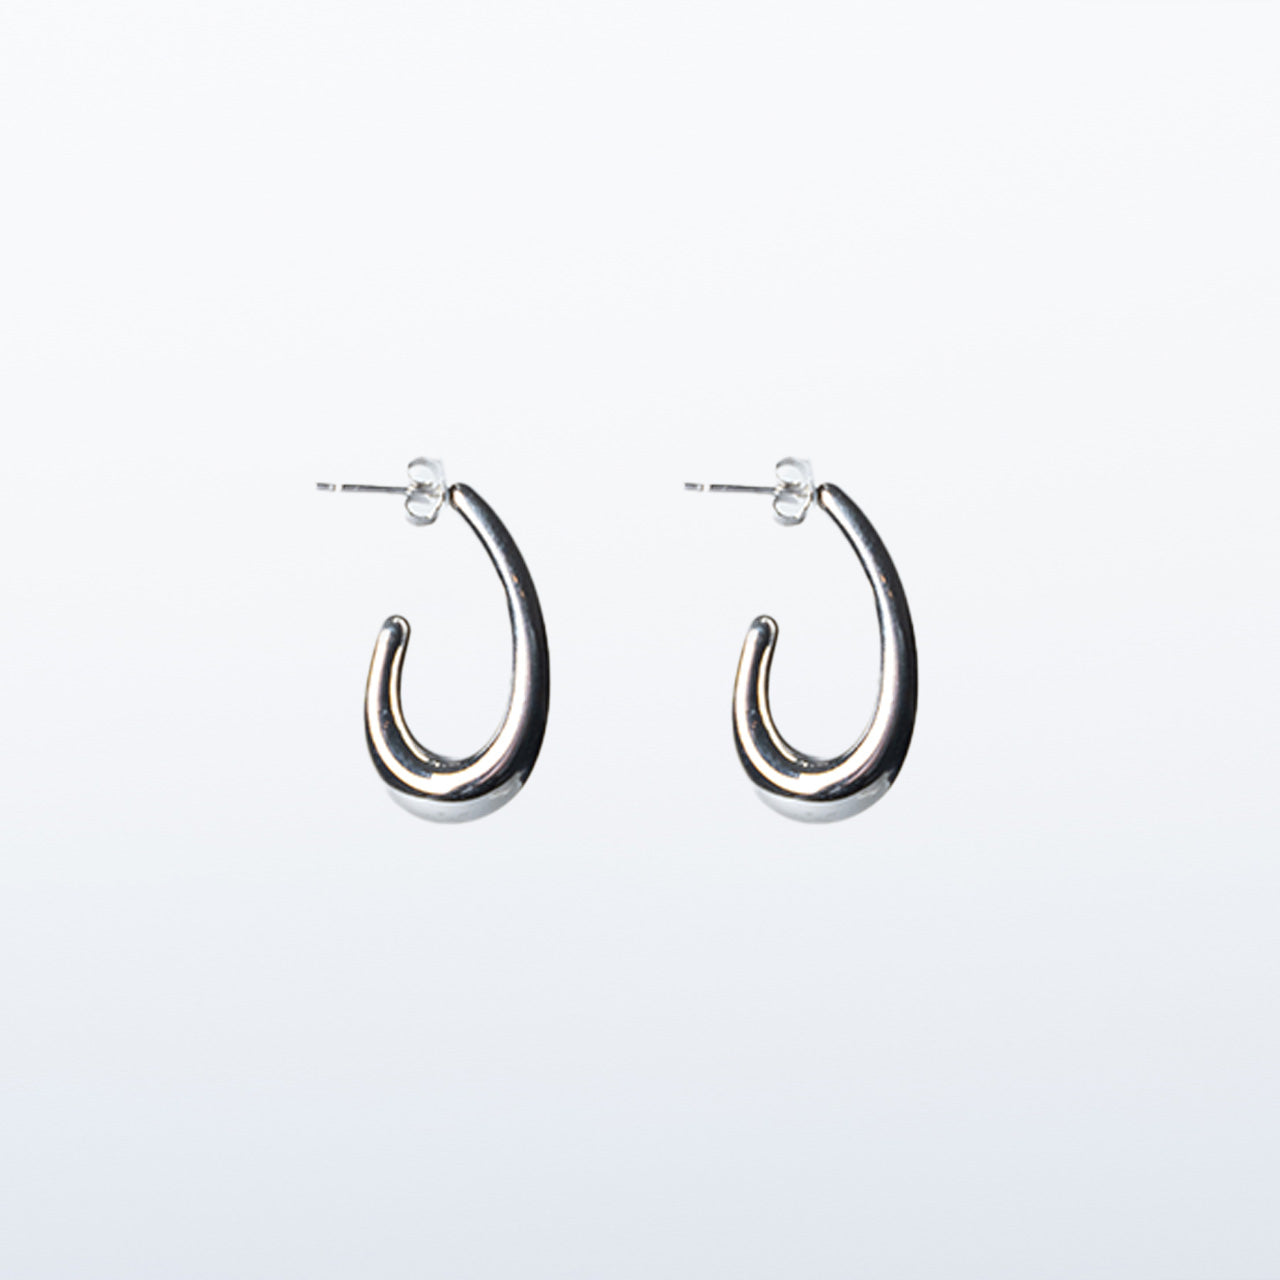 Snash - Earrings "Creoles oval" silver